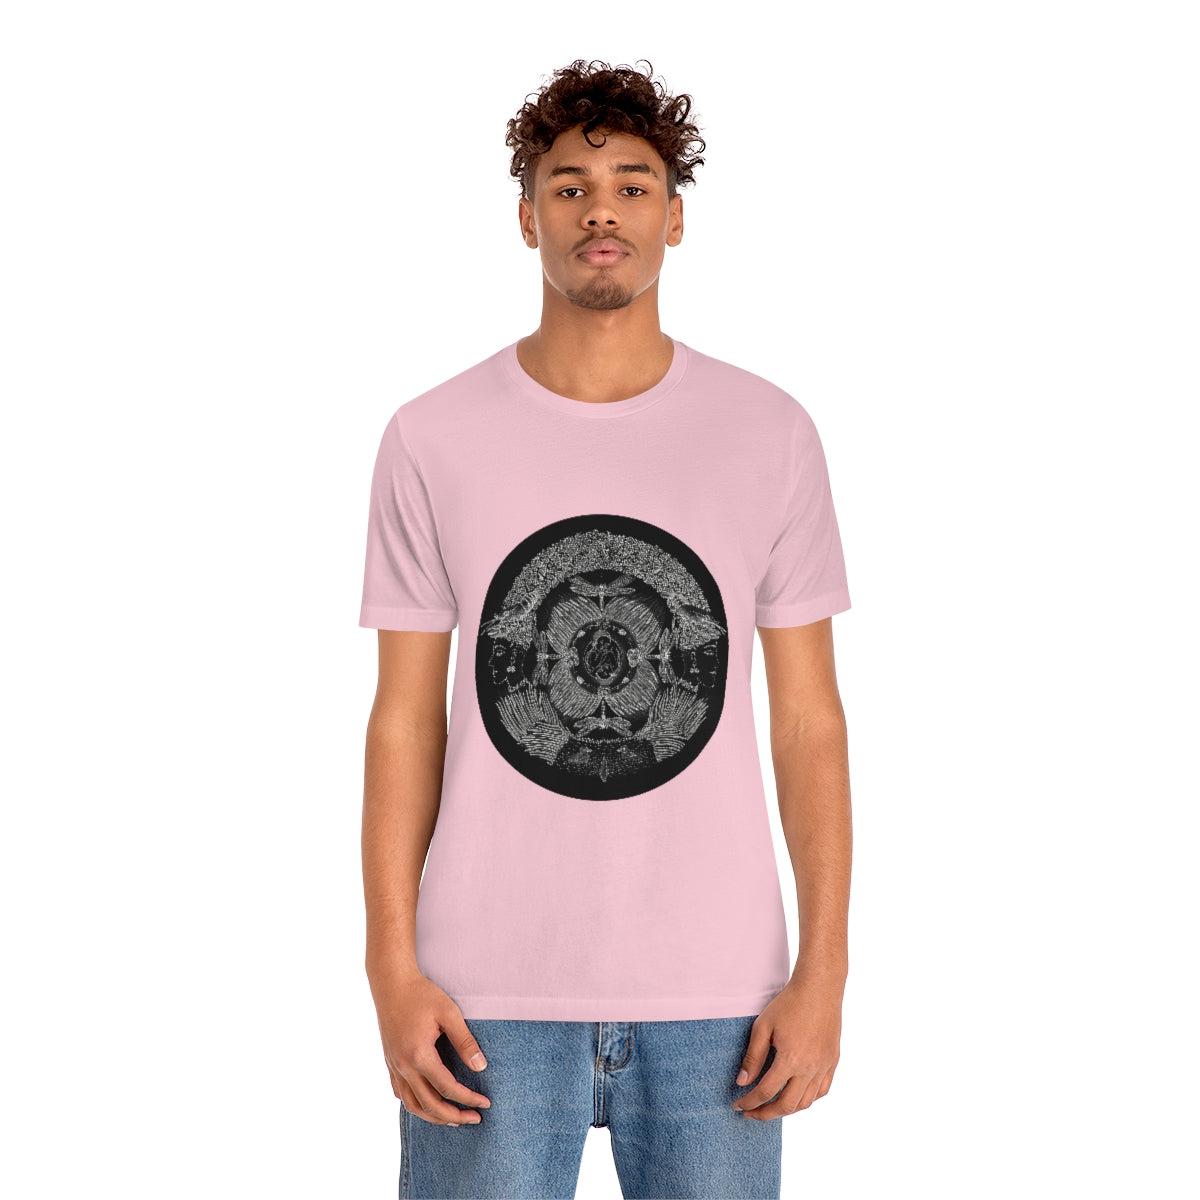 Zodiac Sign T Shirt (Cancer) Unisex Regular Fit Limited Edition